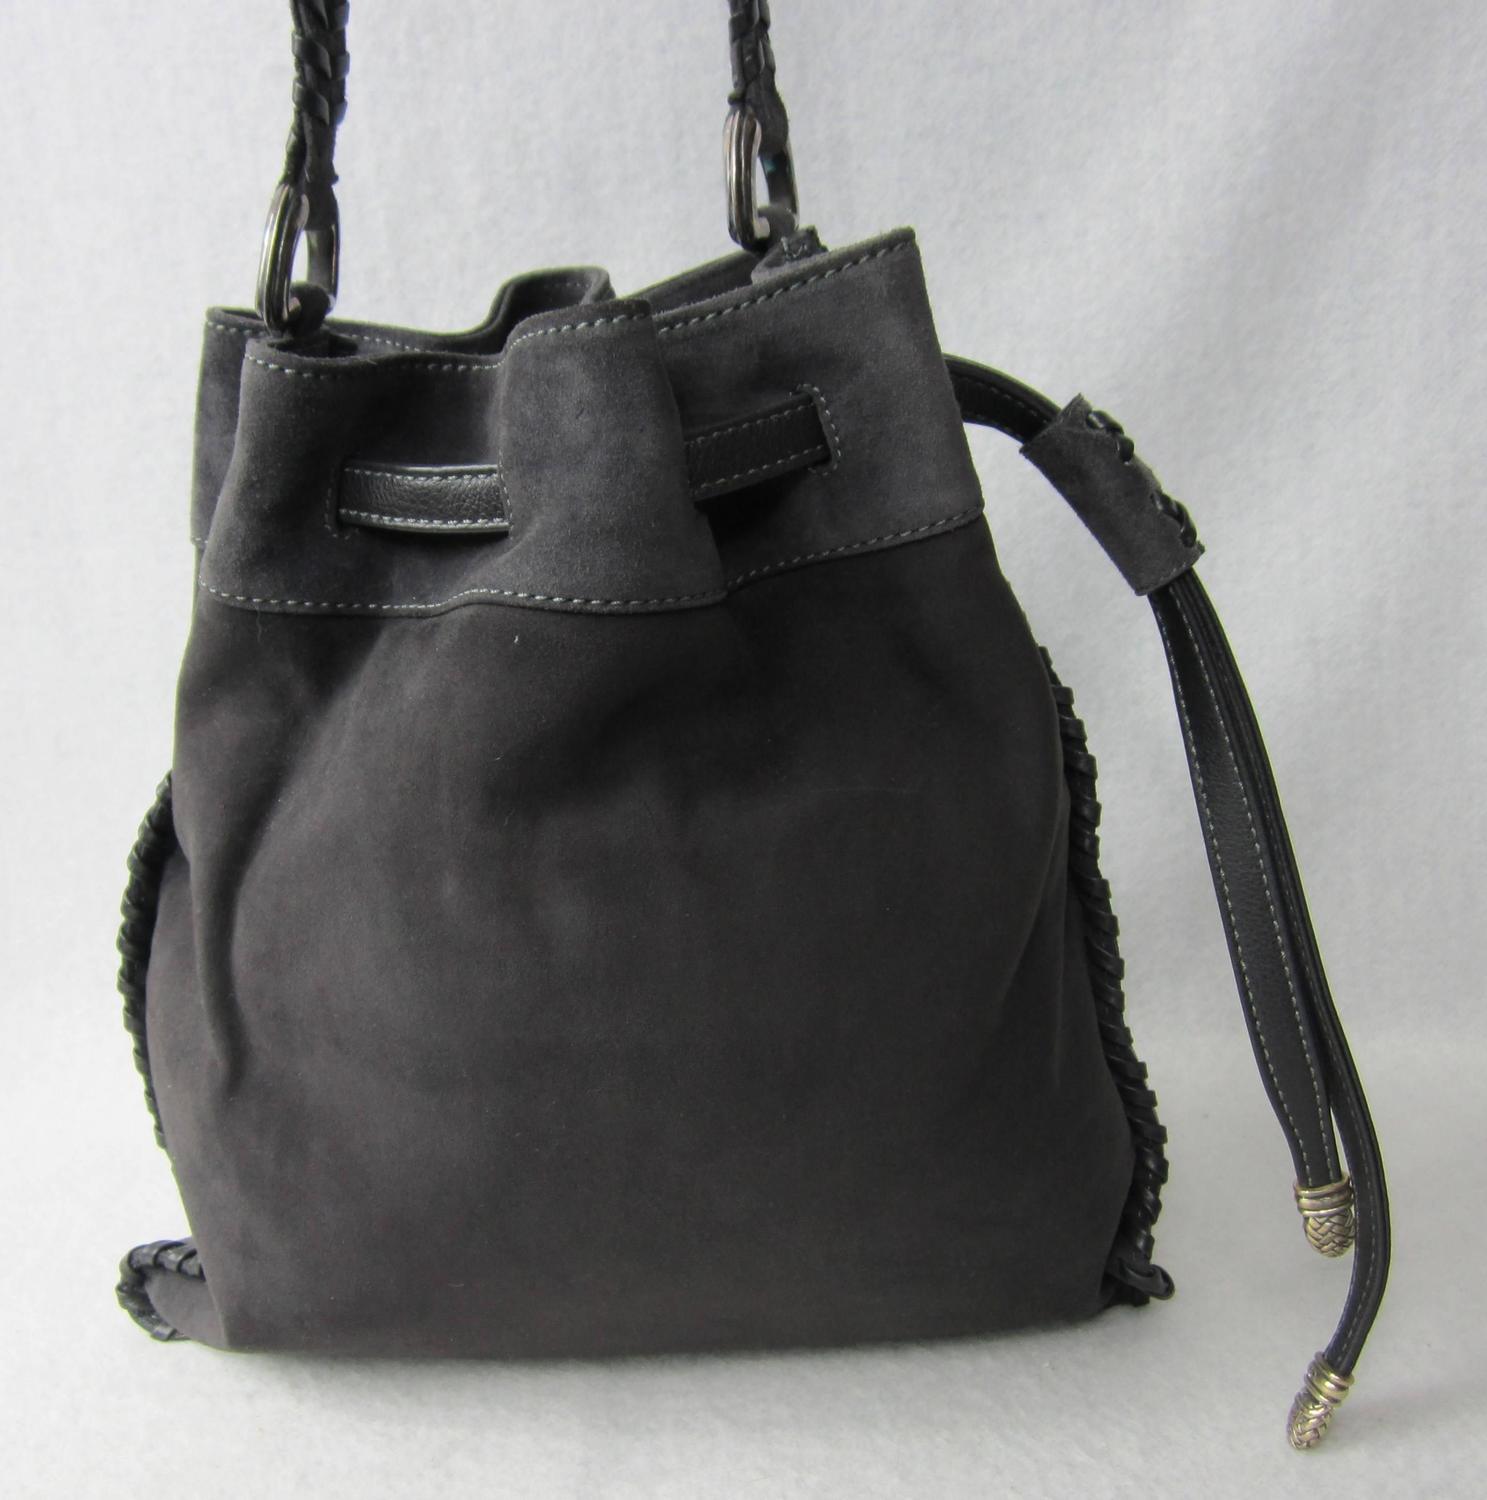 Barry Kieselstein Cord Steel Gray Suede Leather Drawstring Handbag For Sale at 1stdibs